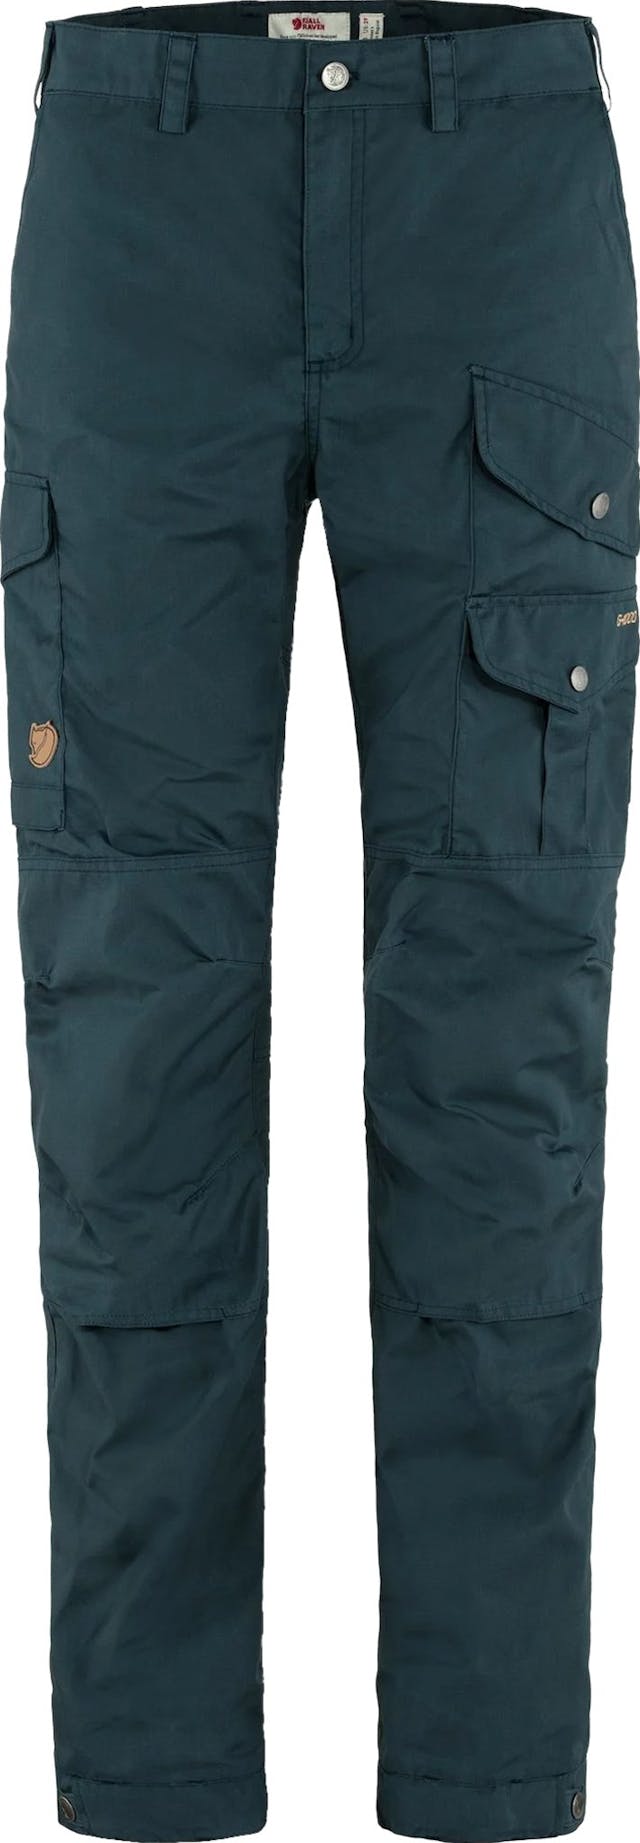 Product image for Vidda Pro Trousers - Regular - Women's